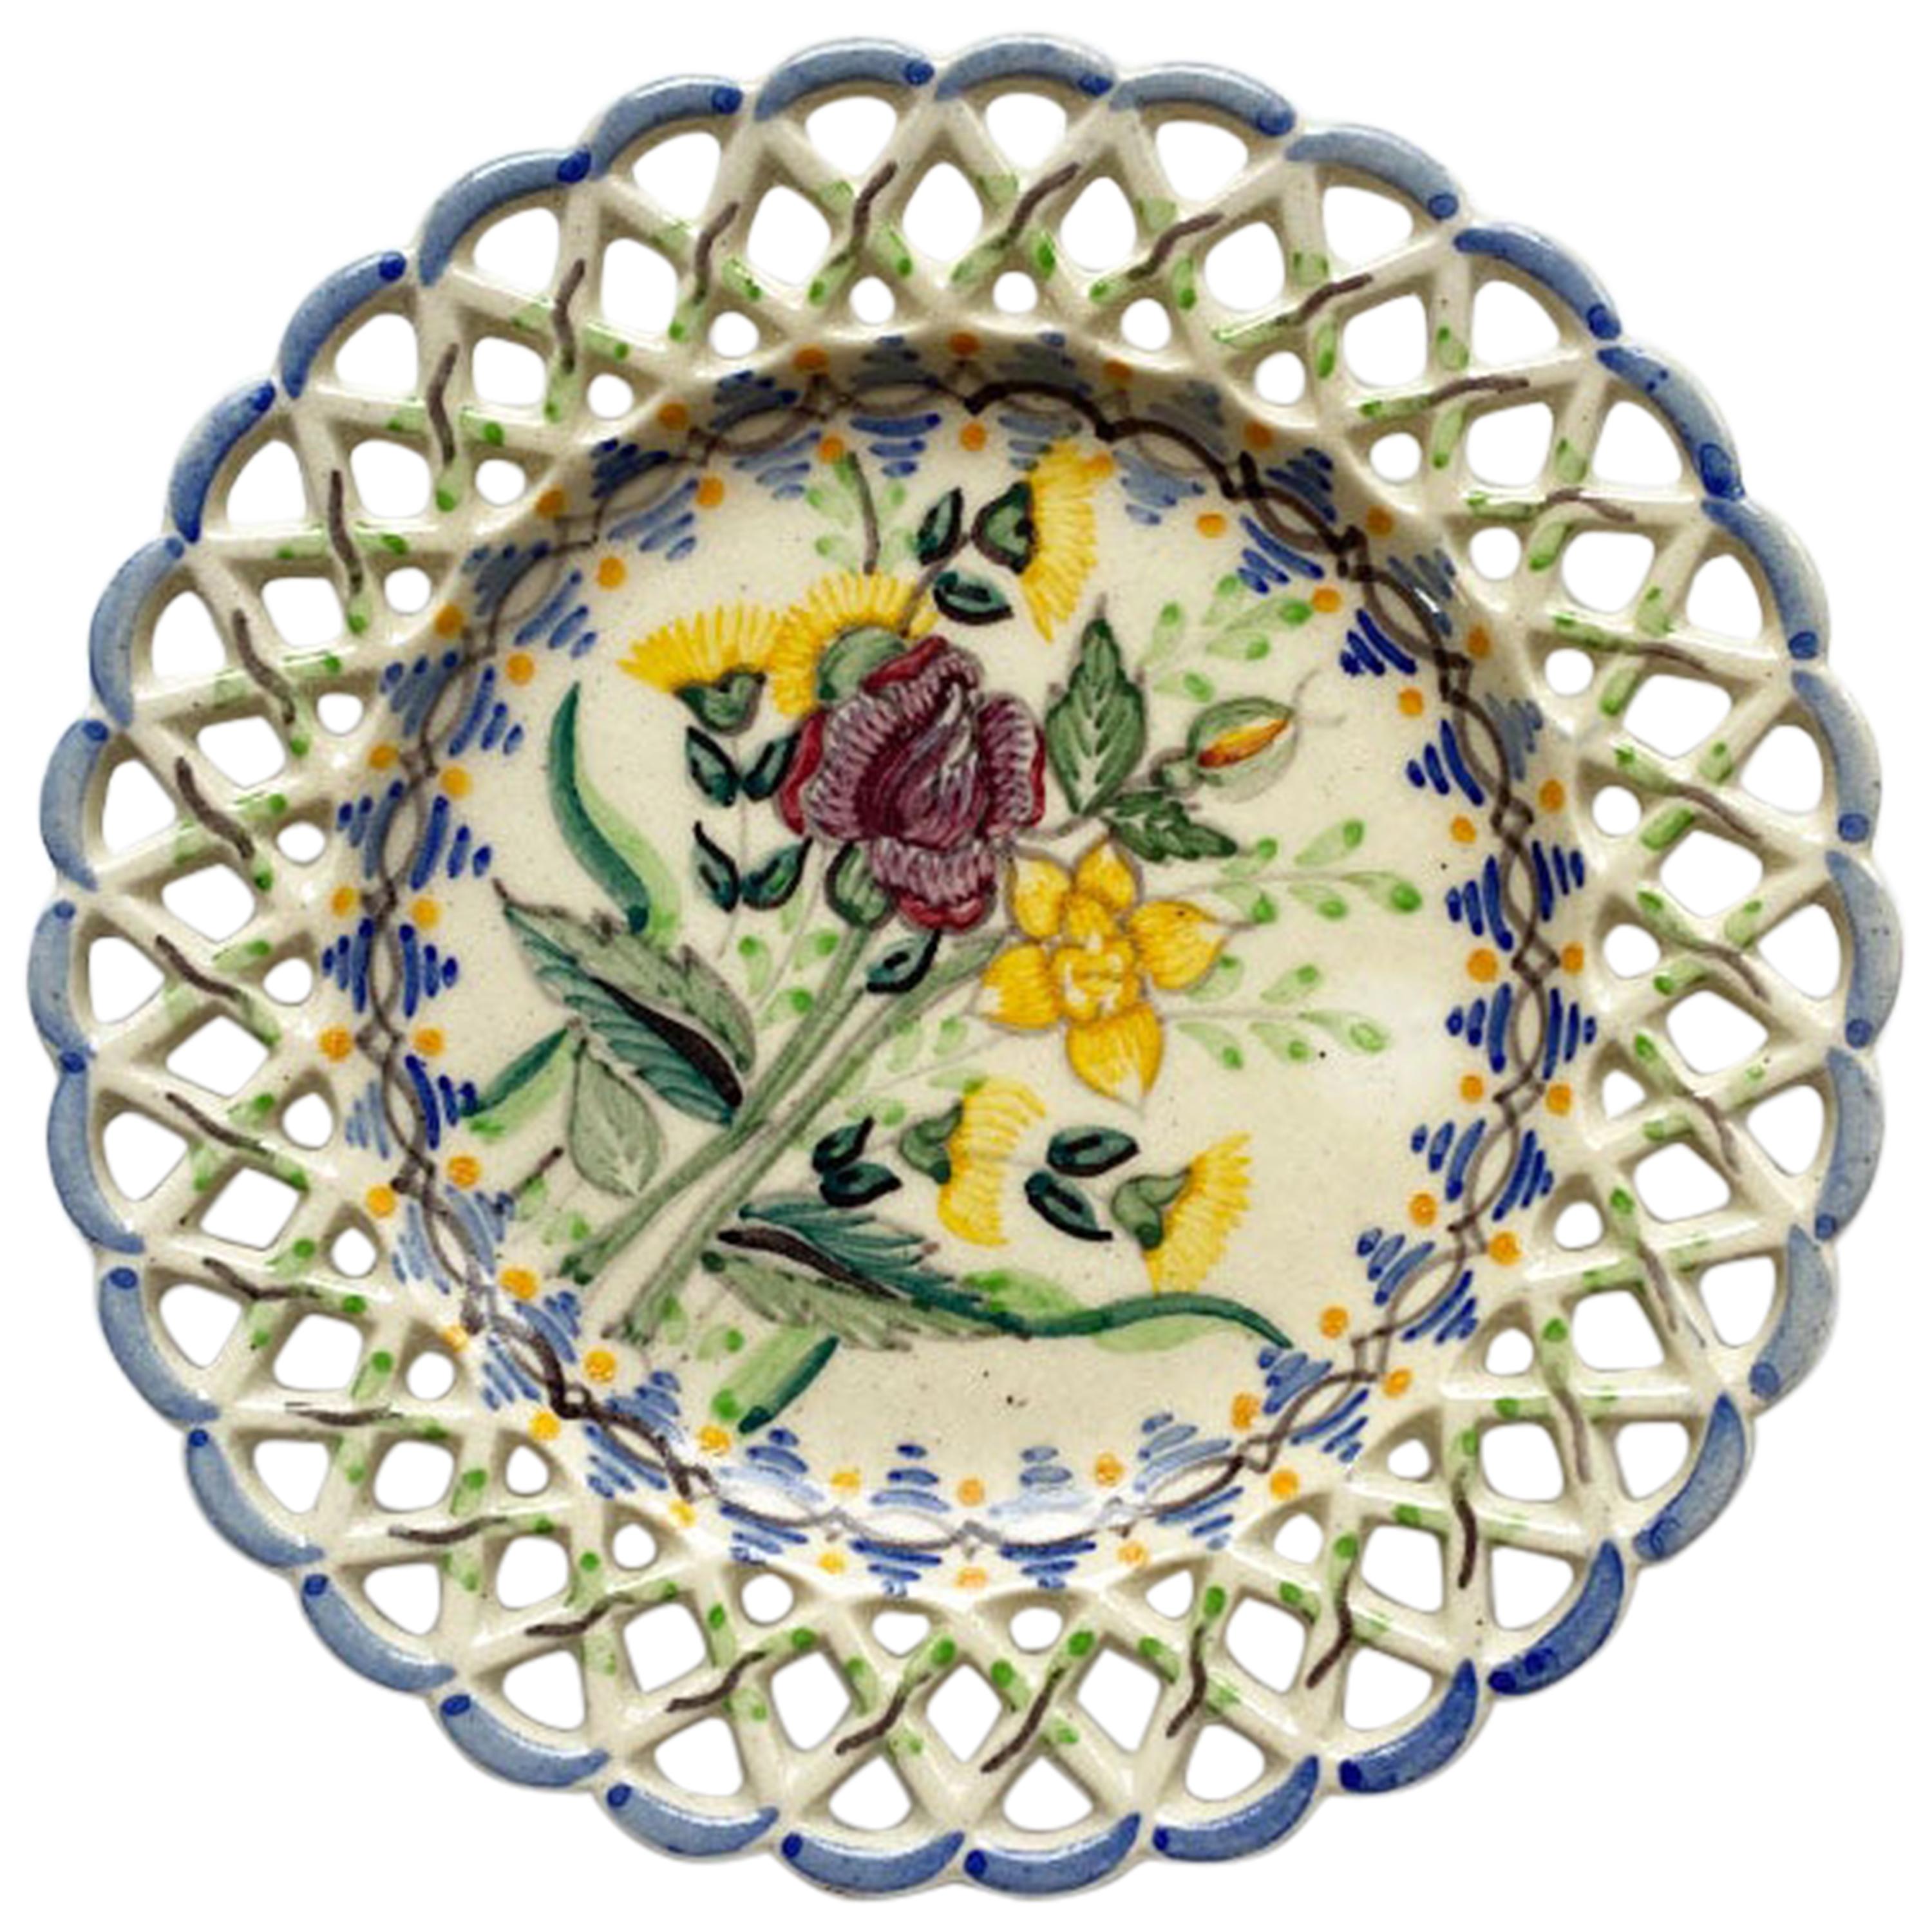 Round Decorative Ceramic Maroon Blue and Yellow Floral Motif Dish, Portugal